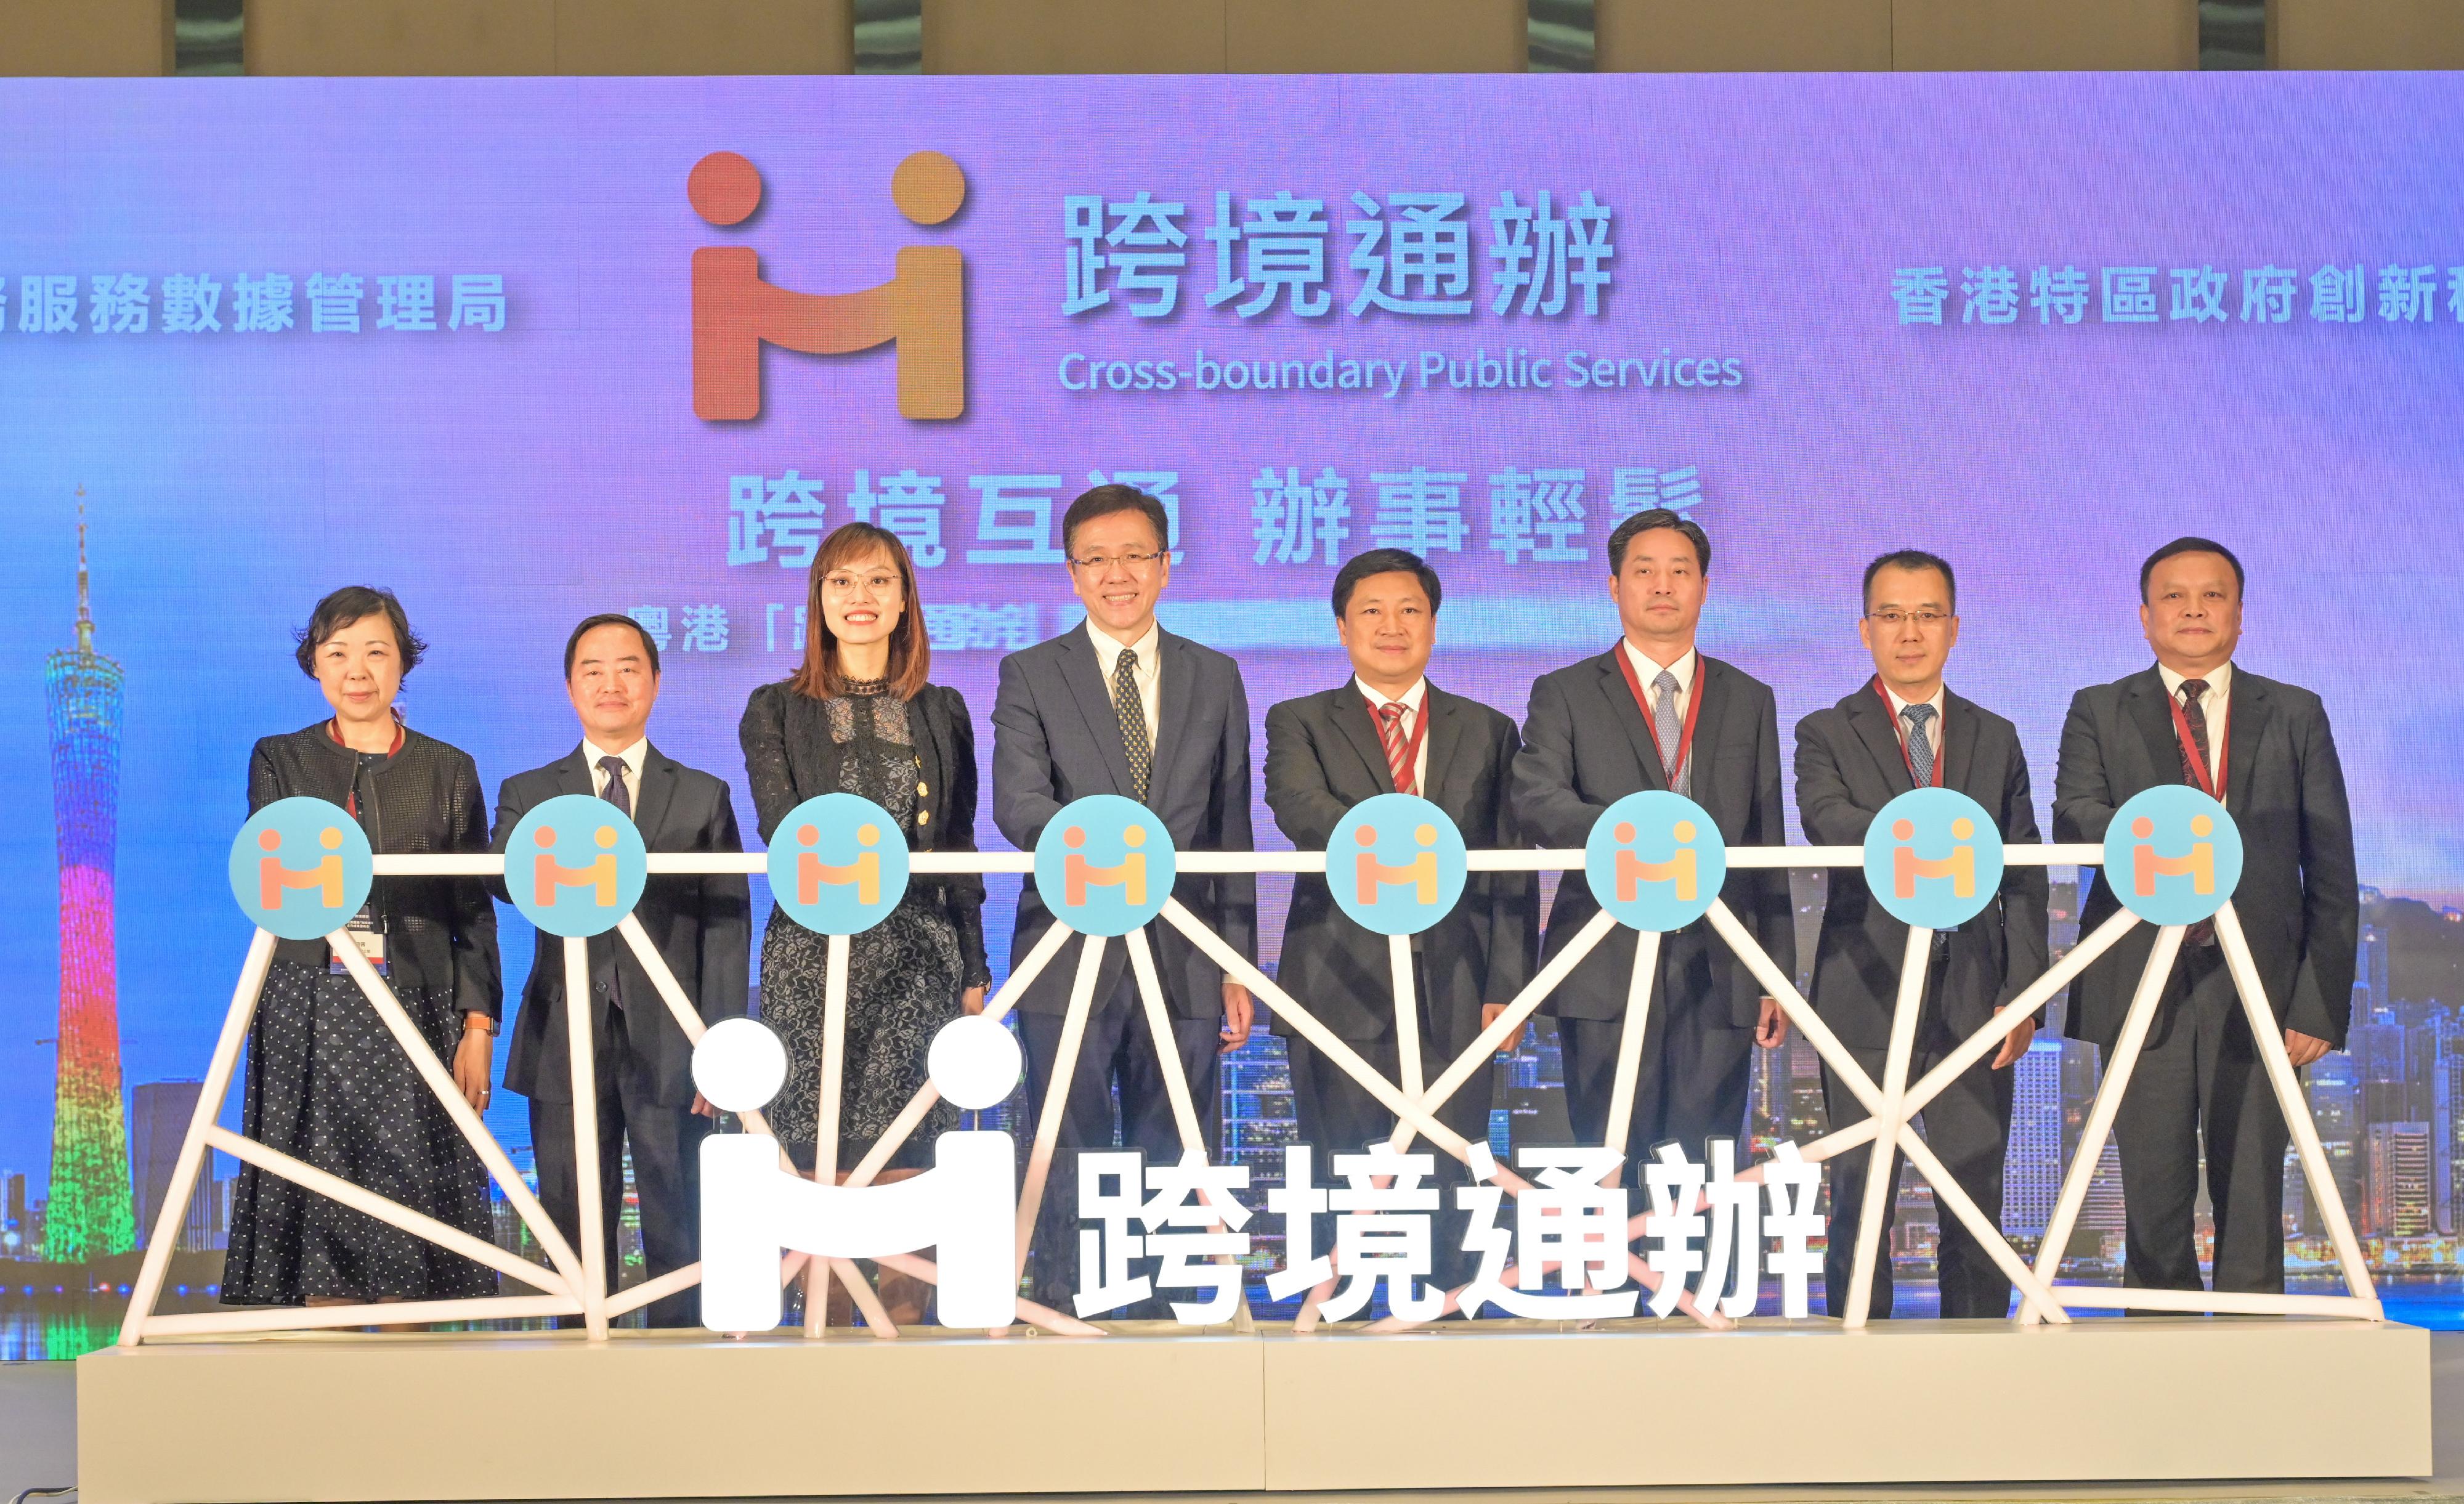 The Secretary for Innovation, Technology and Industry, Professor Sun Dong, and Deputy Secretary General of the People's Government of Guangdong Province Mr Xu Dianhui co-chaired the ceremony for promulgation of the Hong Kong/Guangdong Cross-boundary Public Services Co-operation Achievements today (November 2). Photo shows Professor Sun (fourth left) and Mr Xu (fourth right), together with the Director-General of the Guangdong Provincial Administration of Government Service and Data, Mr Yang Pengfei (third right); the Under Secretary for Innovation, Technology and Industry, Ms Lillian Cheong (third left); member of the Leading Party Group of the Guangdong Provincial Administration of Government Service and Data Mr Wei Wentao (first right); the Director-General of Information Centre of the Liaison Office of the Central People's Government in the HKSAR, Dr Hao Yinxing (second right); the Government Chief Information Officer, Mr Tony Wong (second left); and the Commissioner for Efficiency, Miss Patricia So (first left), joining the launching ceremony of the Cross-boundary Public Services.